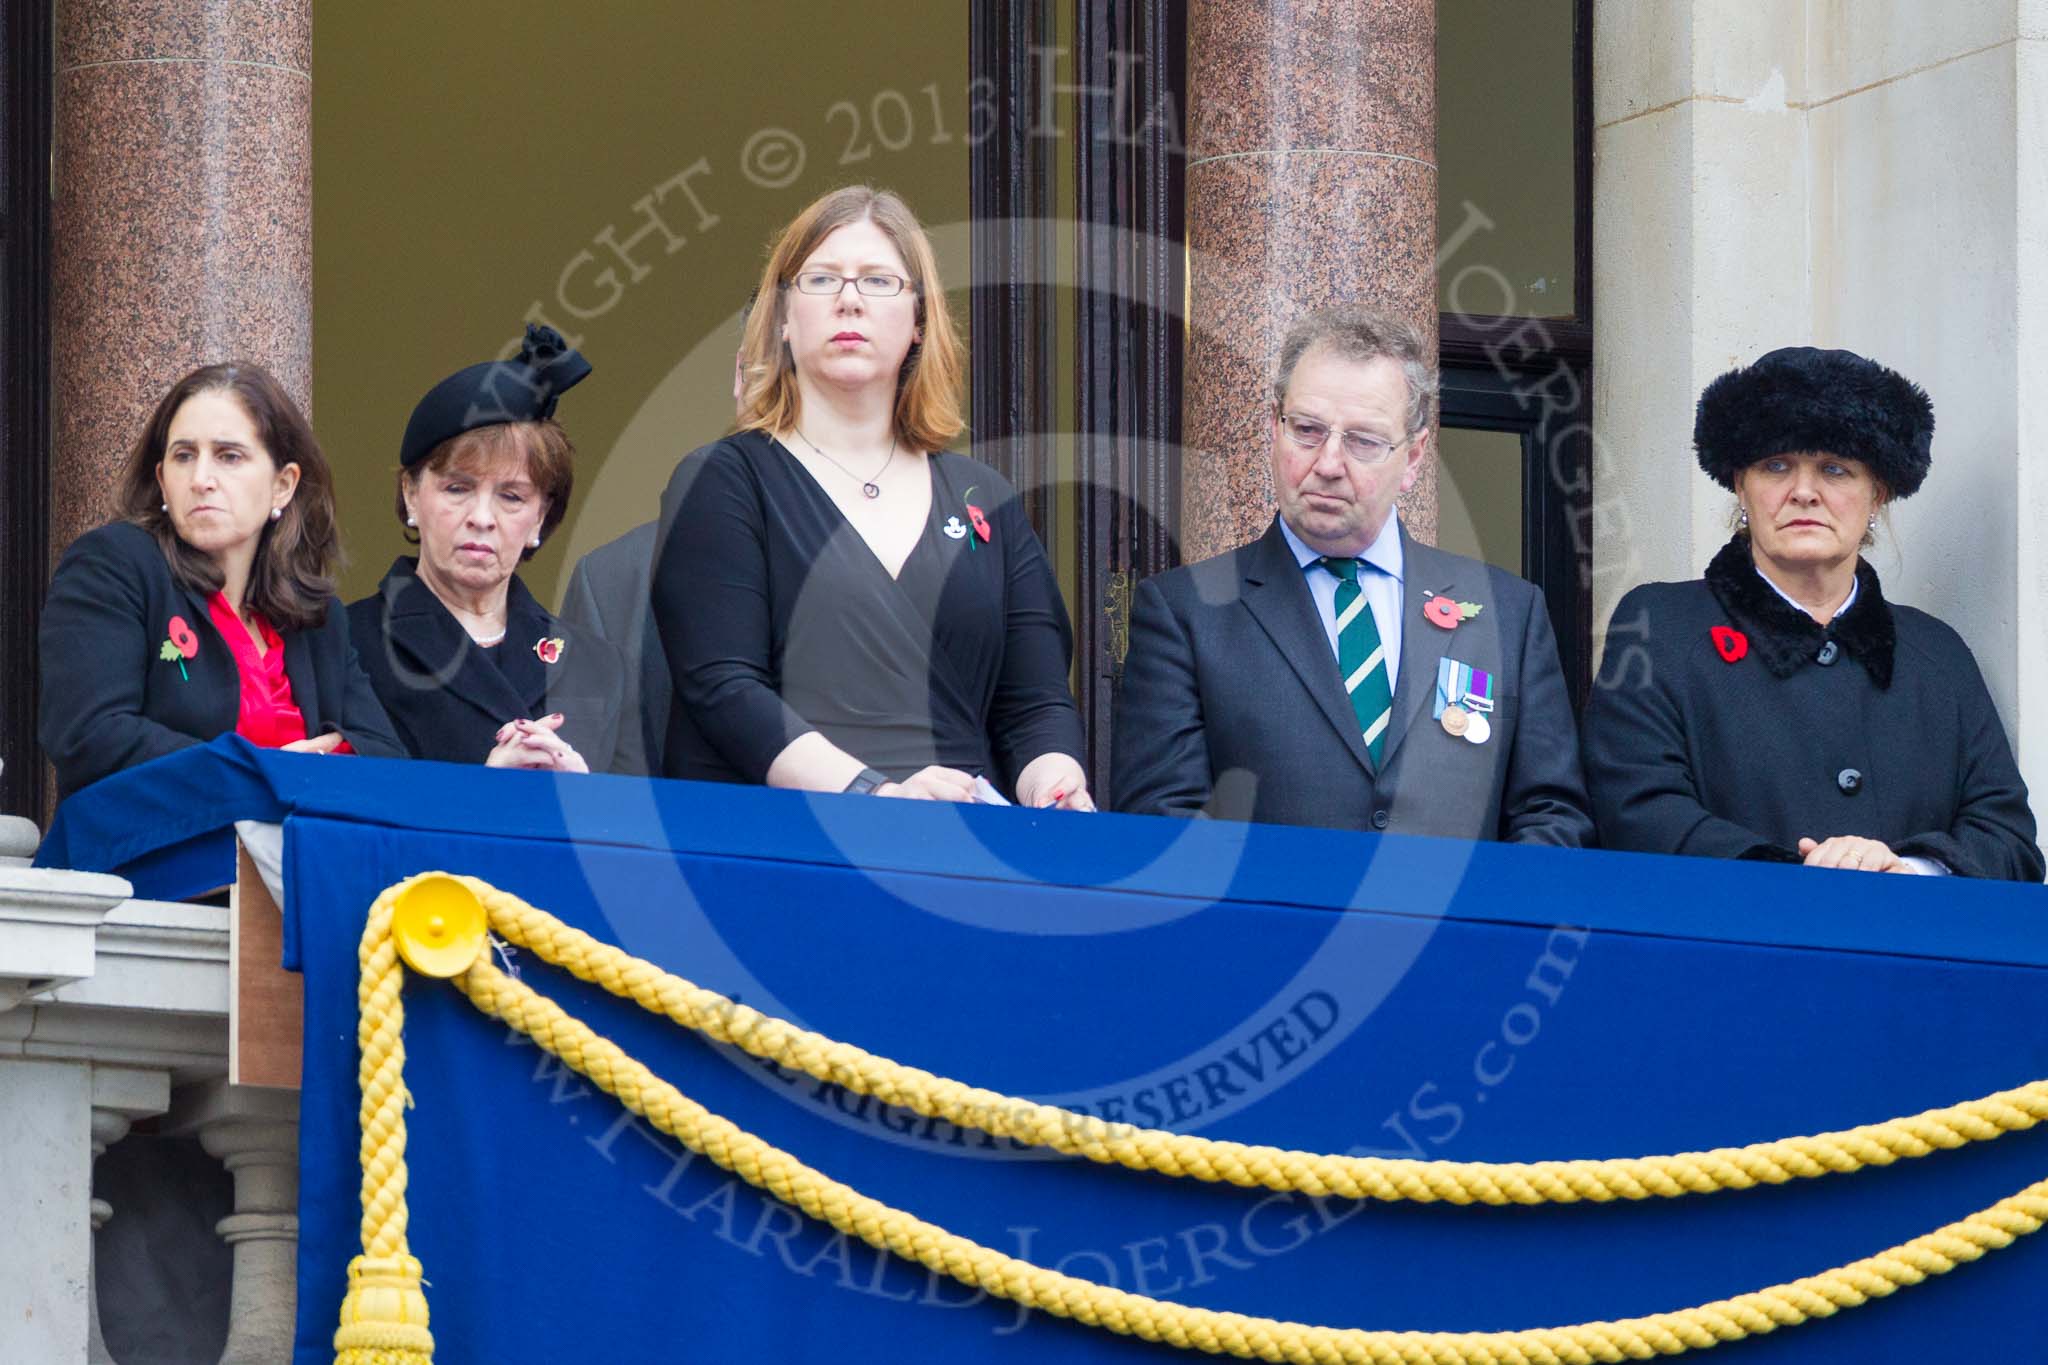 Remembrance Sunday at the Cenotaph 2015: Guests watching the ceremony from one of the balconies of the Foreign- and Commonwealth Office. Image #260, 08 November 2015 11:12 Whitehall, London, UK